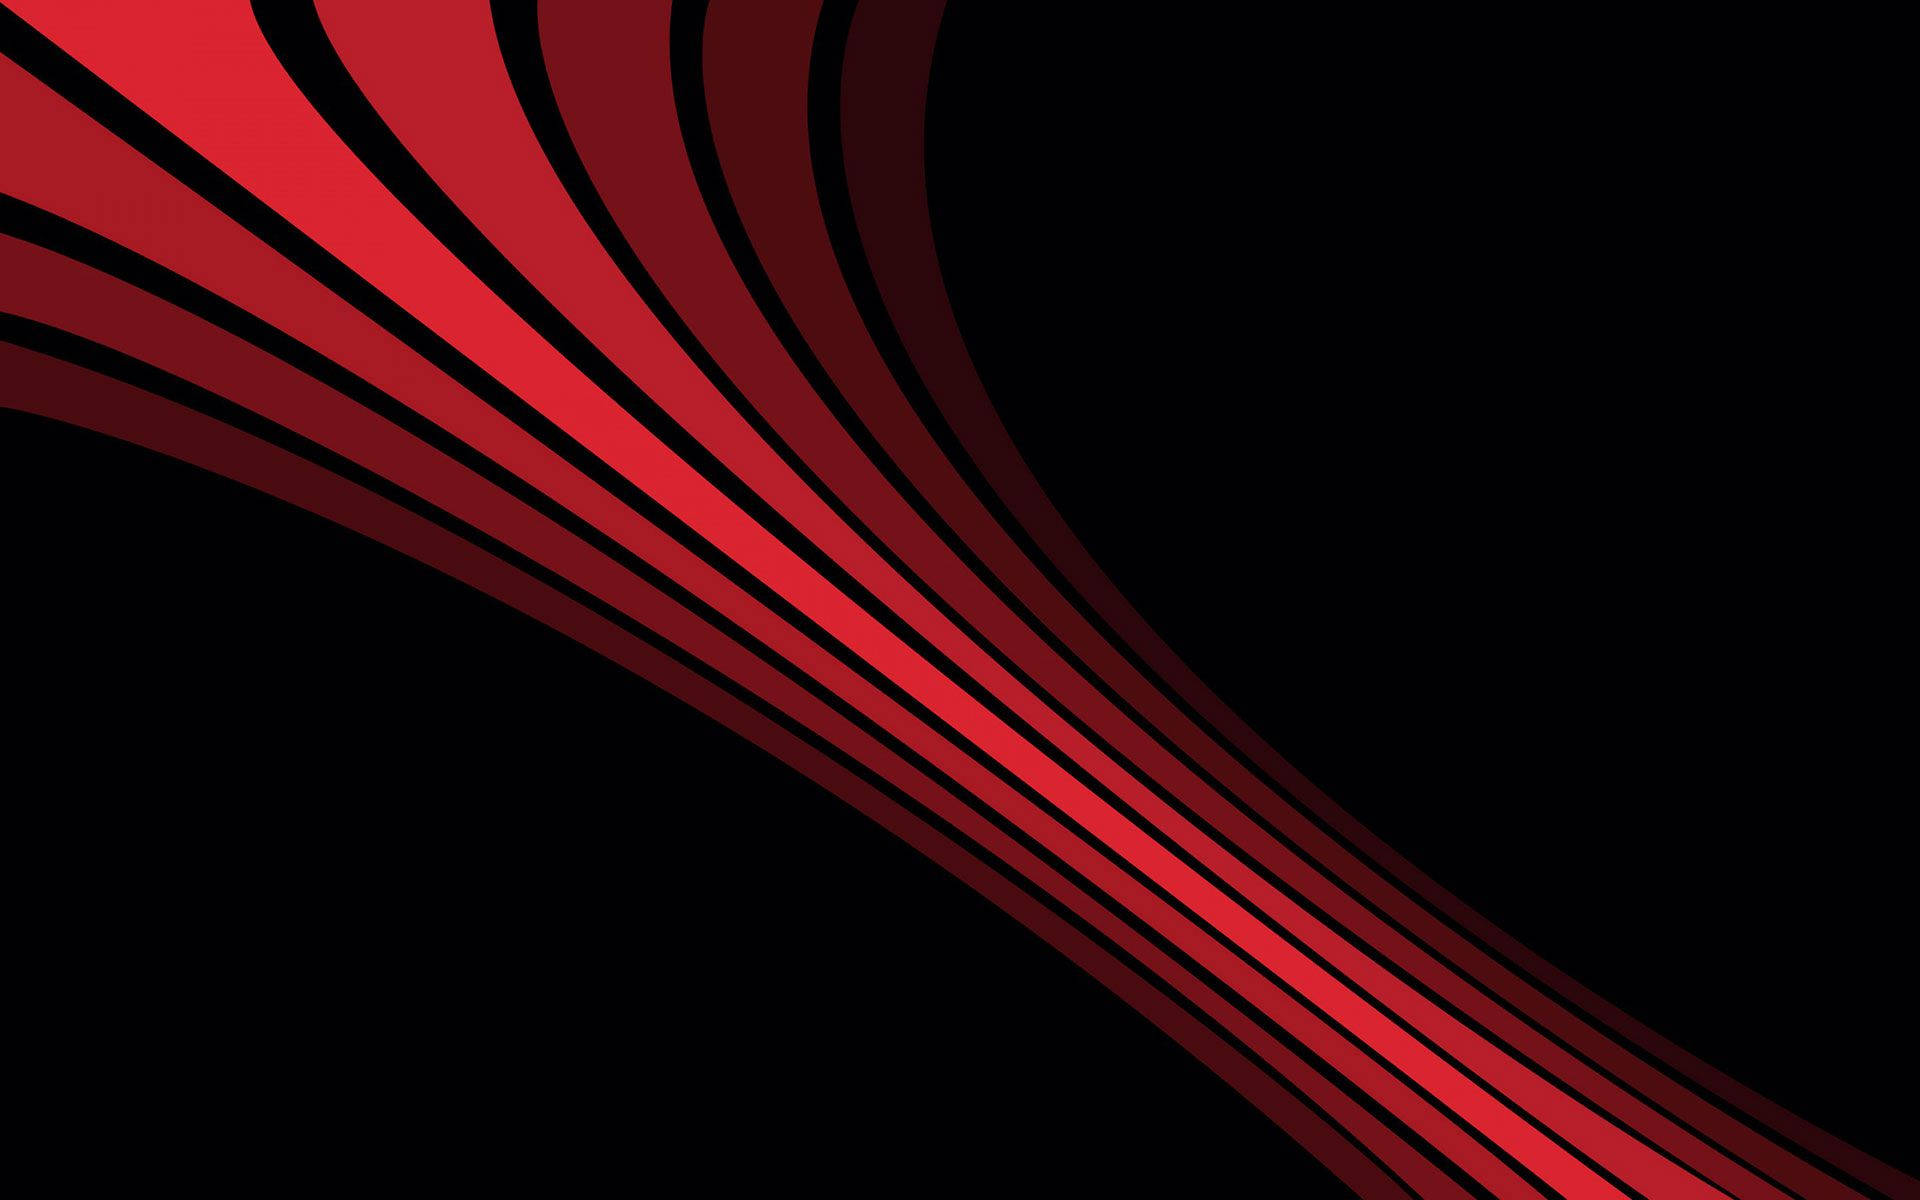 "Explore the Power of Cool Red&Black" Wallpaper